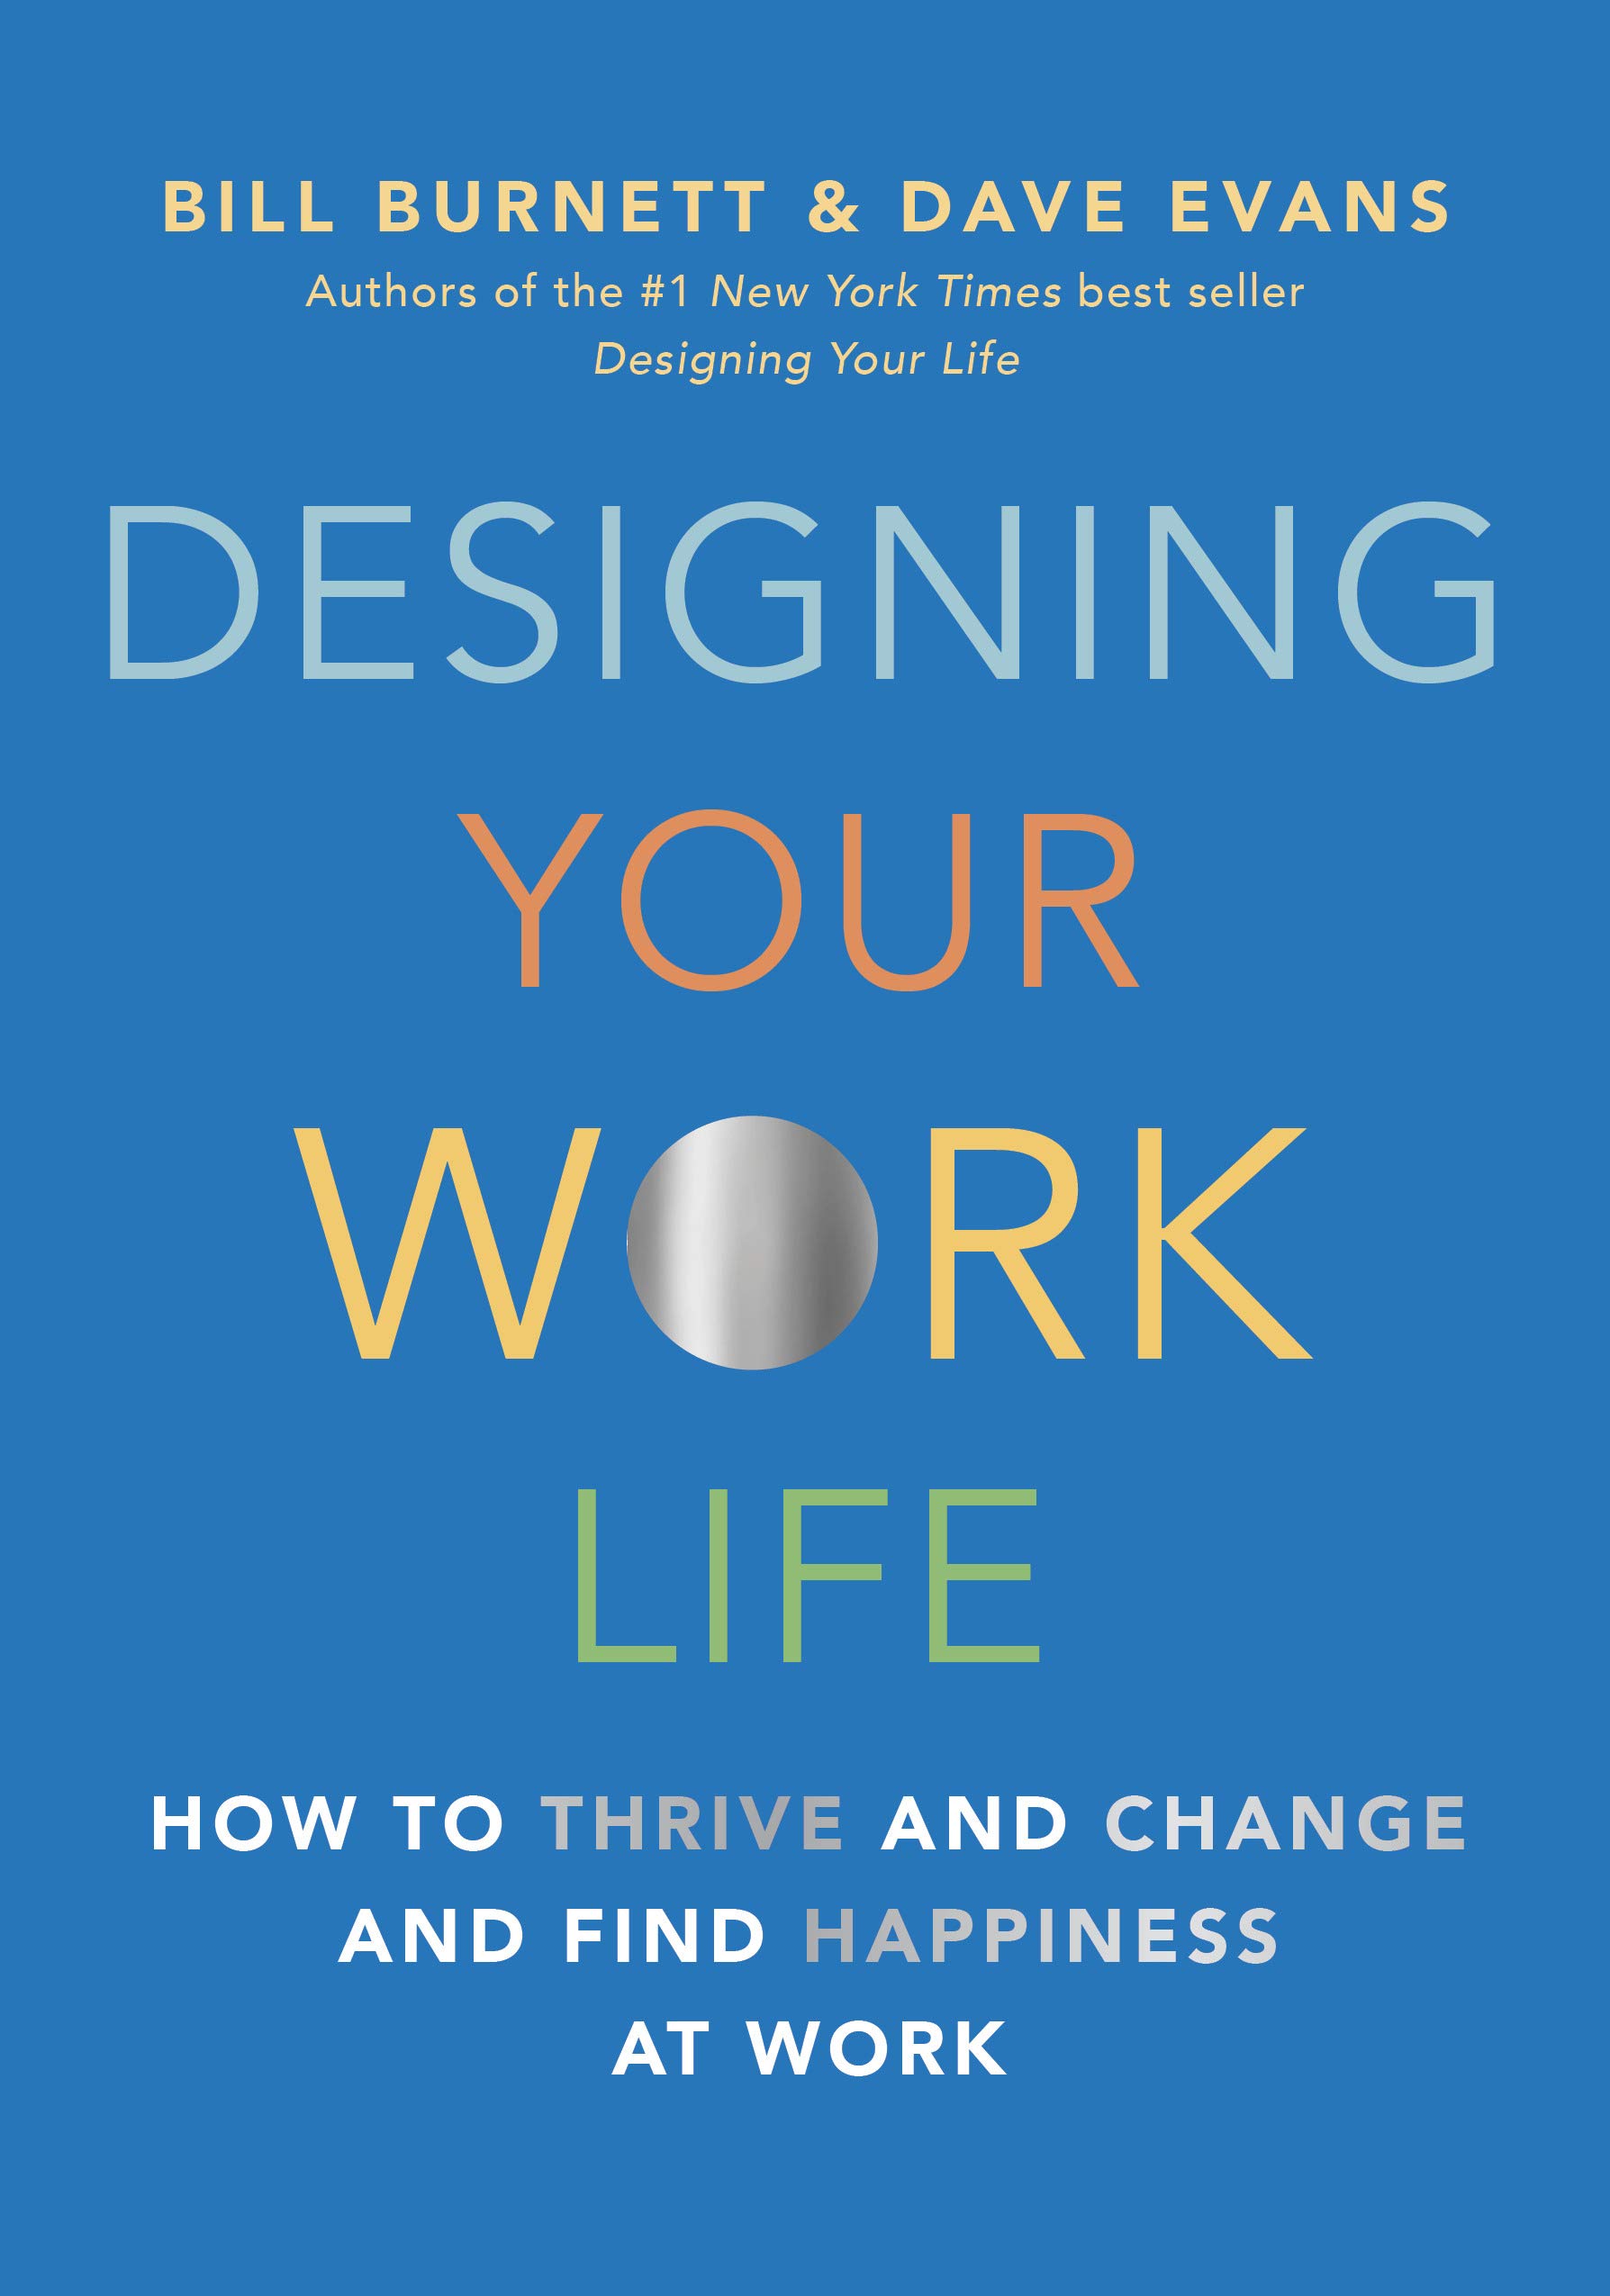 Image for "Designing Your Work Life"